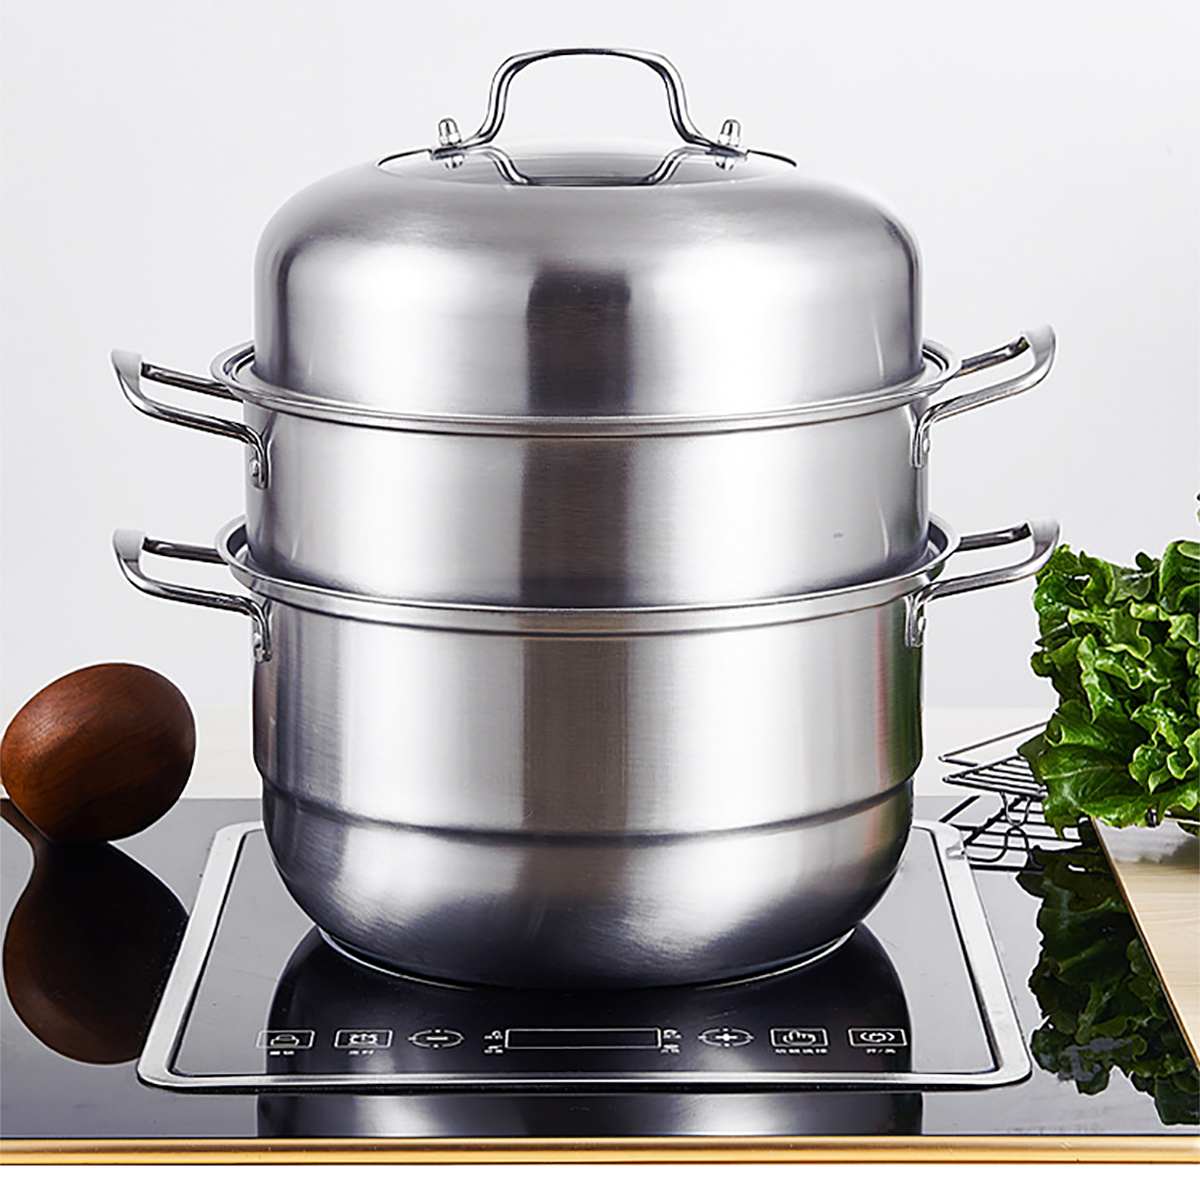 28cm Stainless Steel Boiler Soup Pot Two Three Layer Thick Steamer Pot Universal Cooking Pots for Induction Cooker Gas Stove